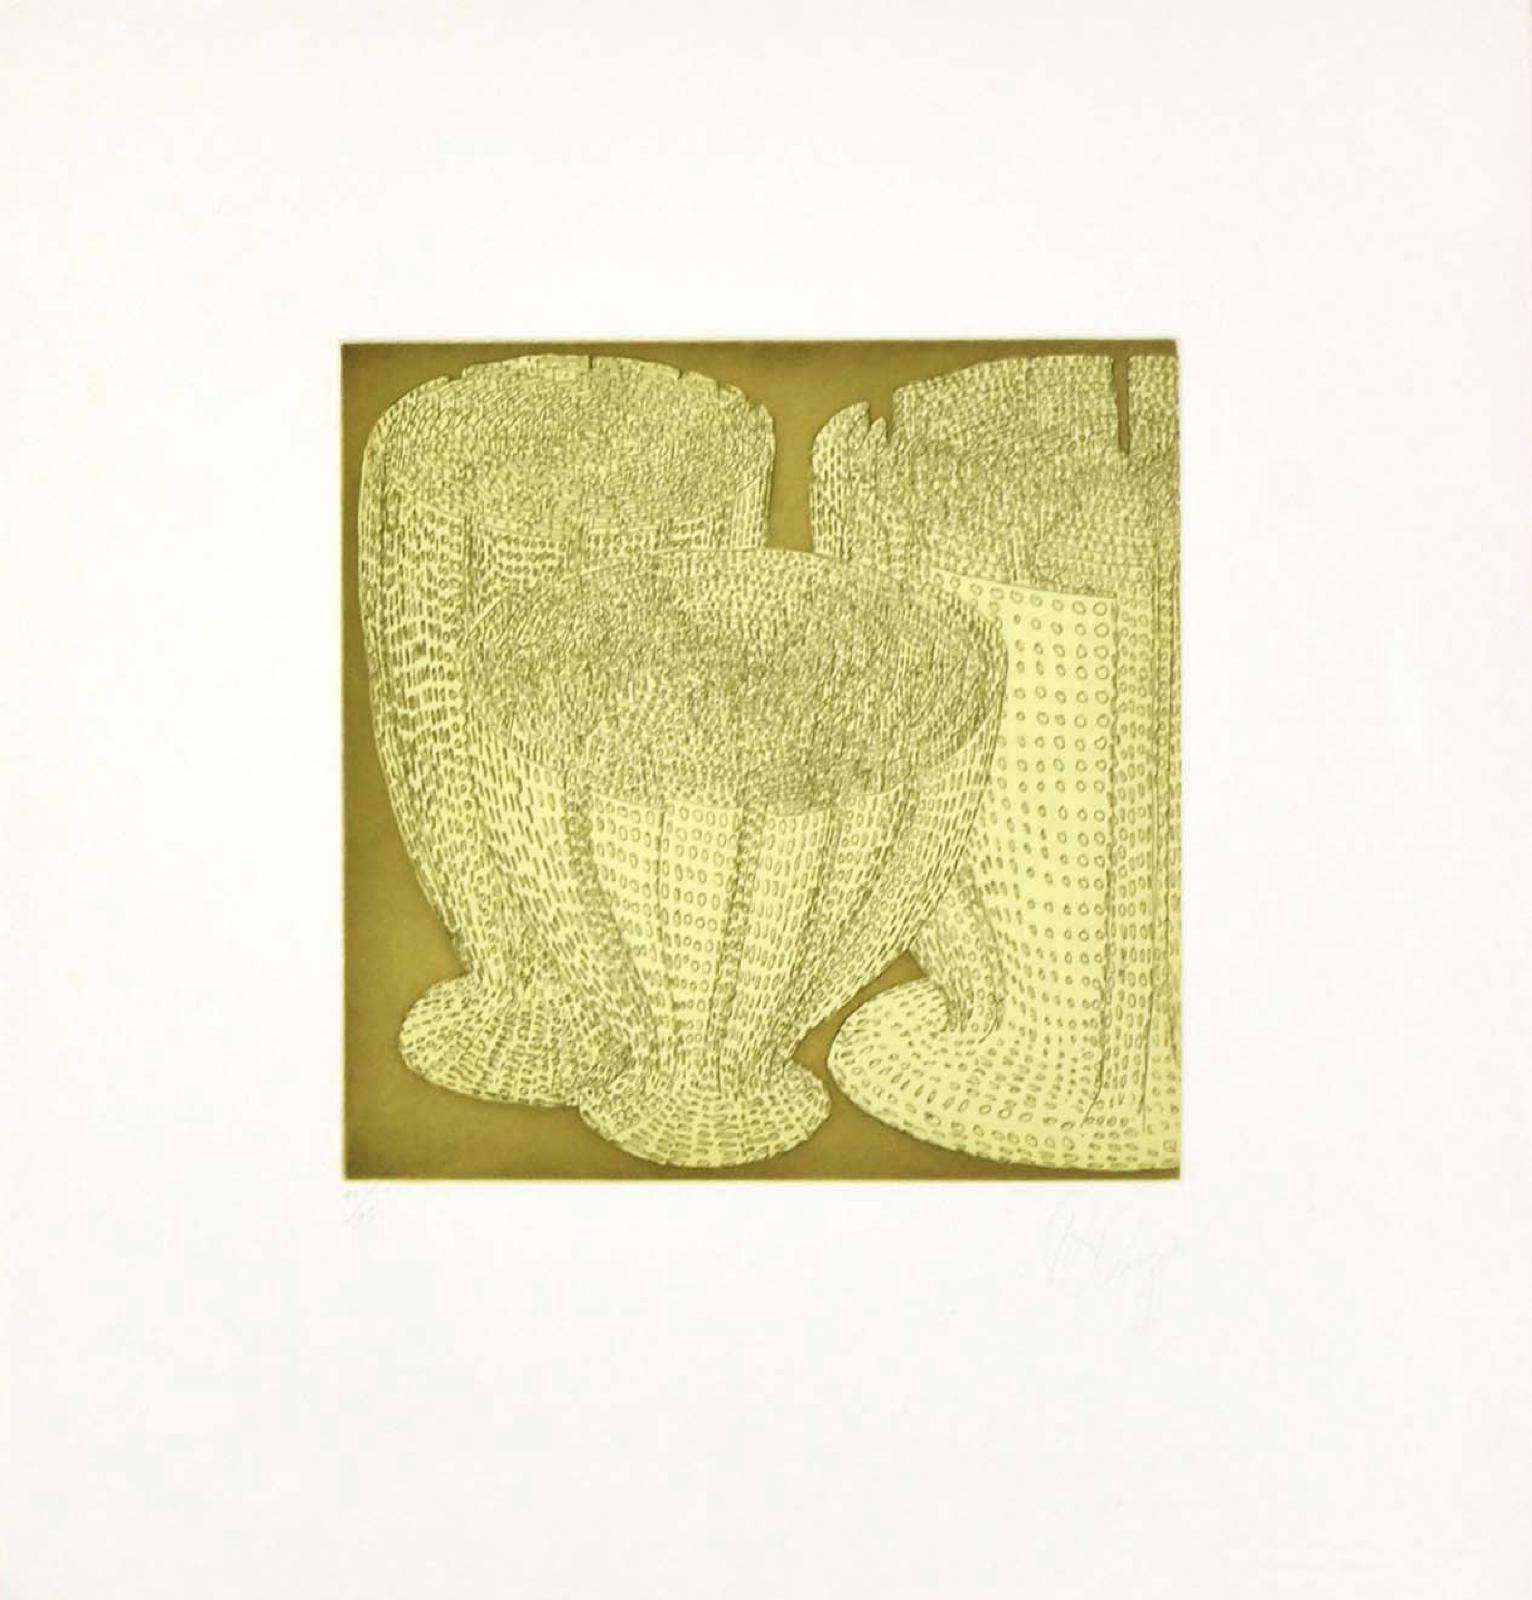 Chalices, state 2, 1990